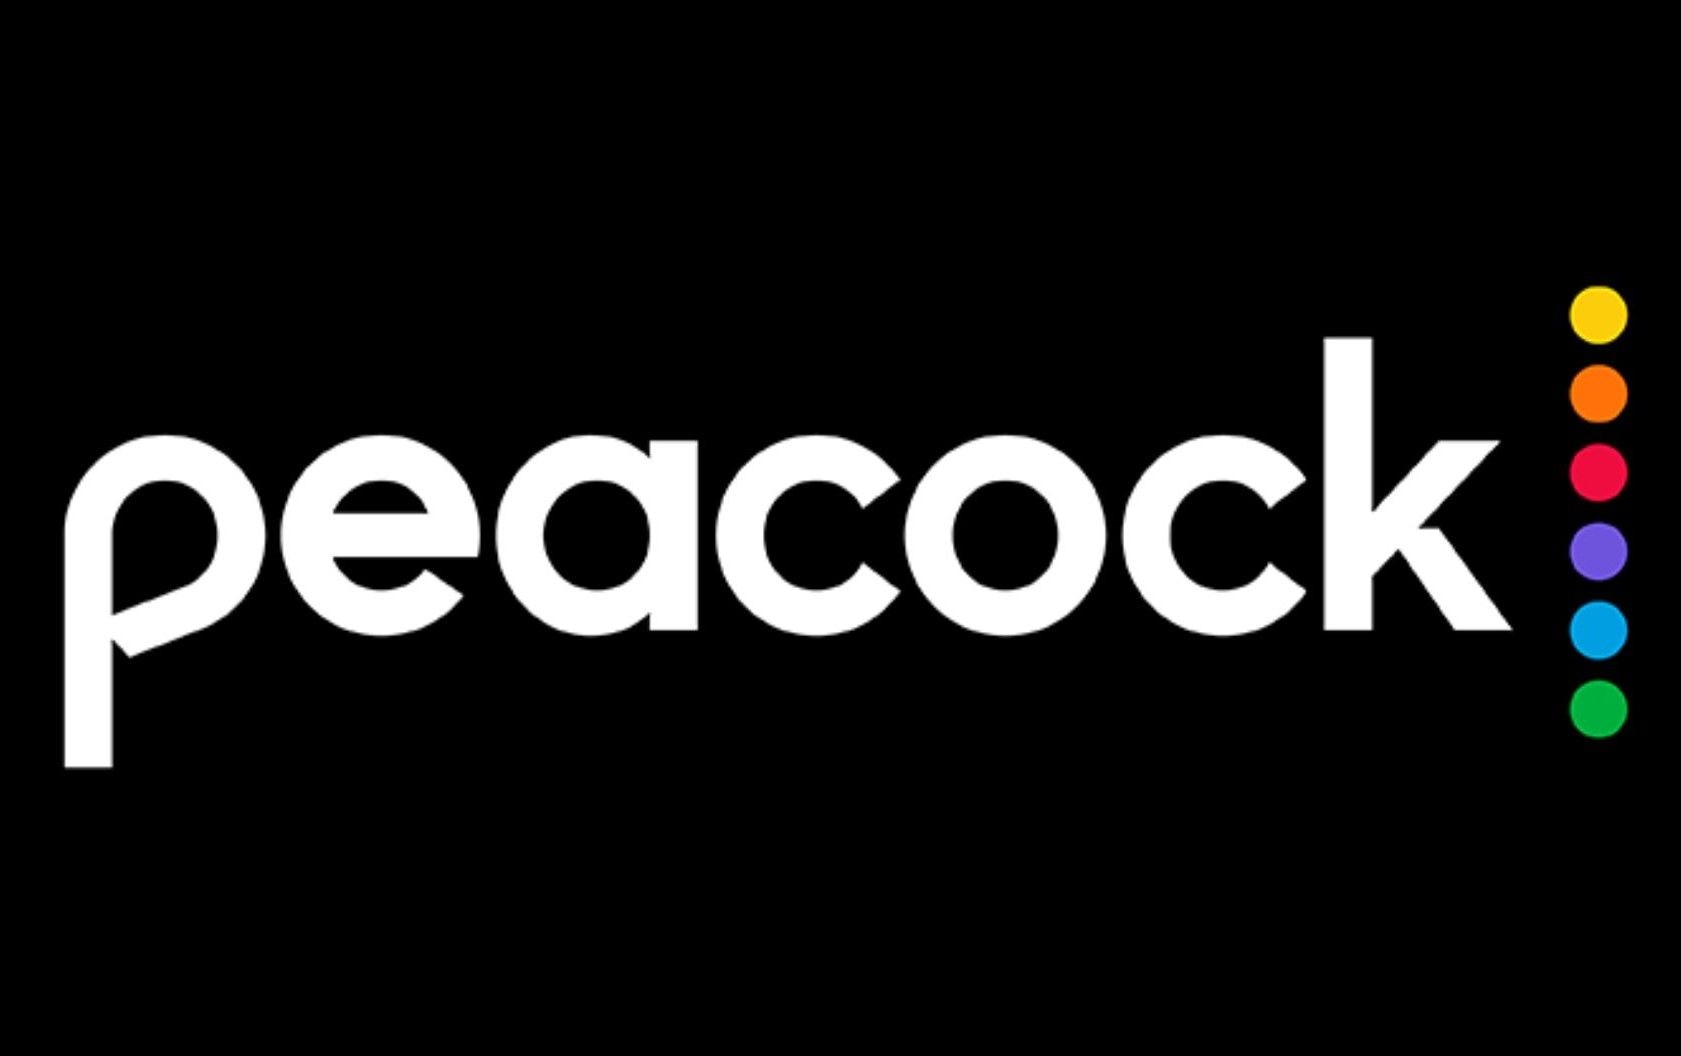 Peacock official